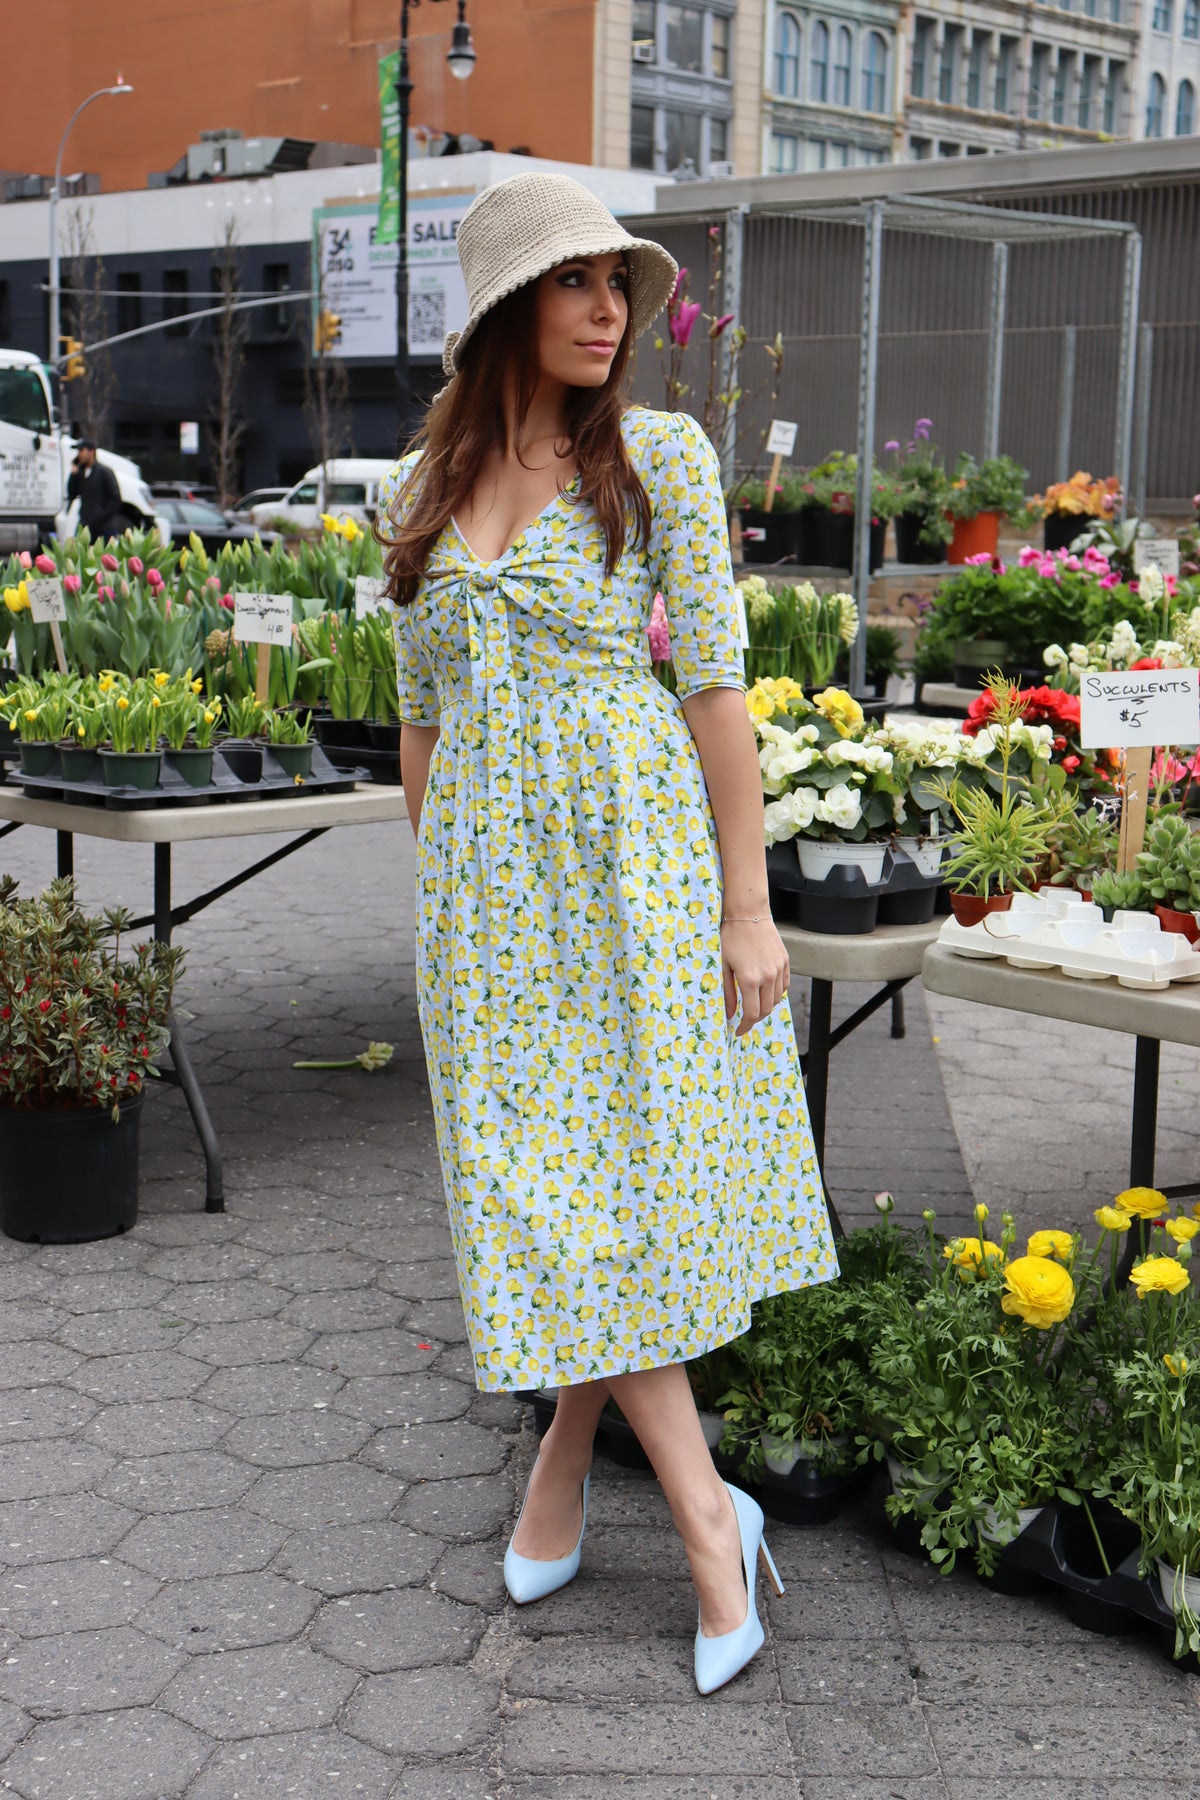 Model wearing a tan bucket hat and a midi dress in a lemon print of aqua blue and  yellow in front of a flower display at a farmer's market.